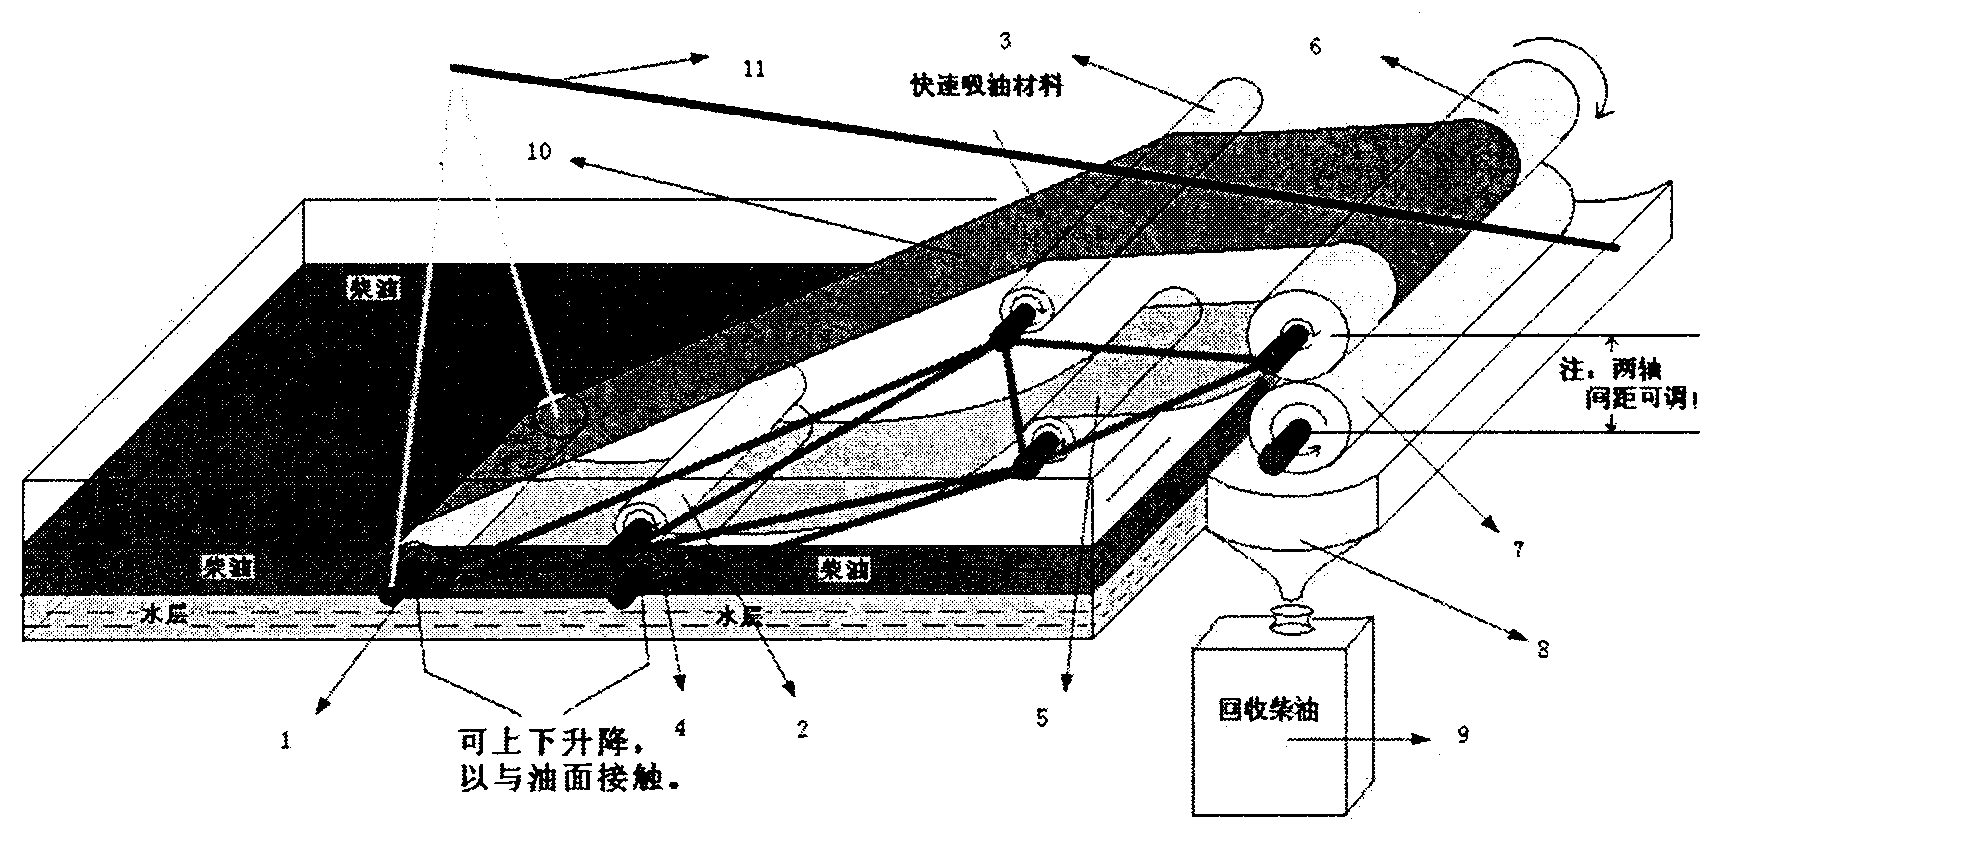 Continuously liftable caterpillar-band-type water surface oil absorption device comprising rapid oil absorption material